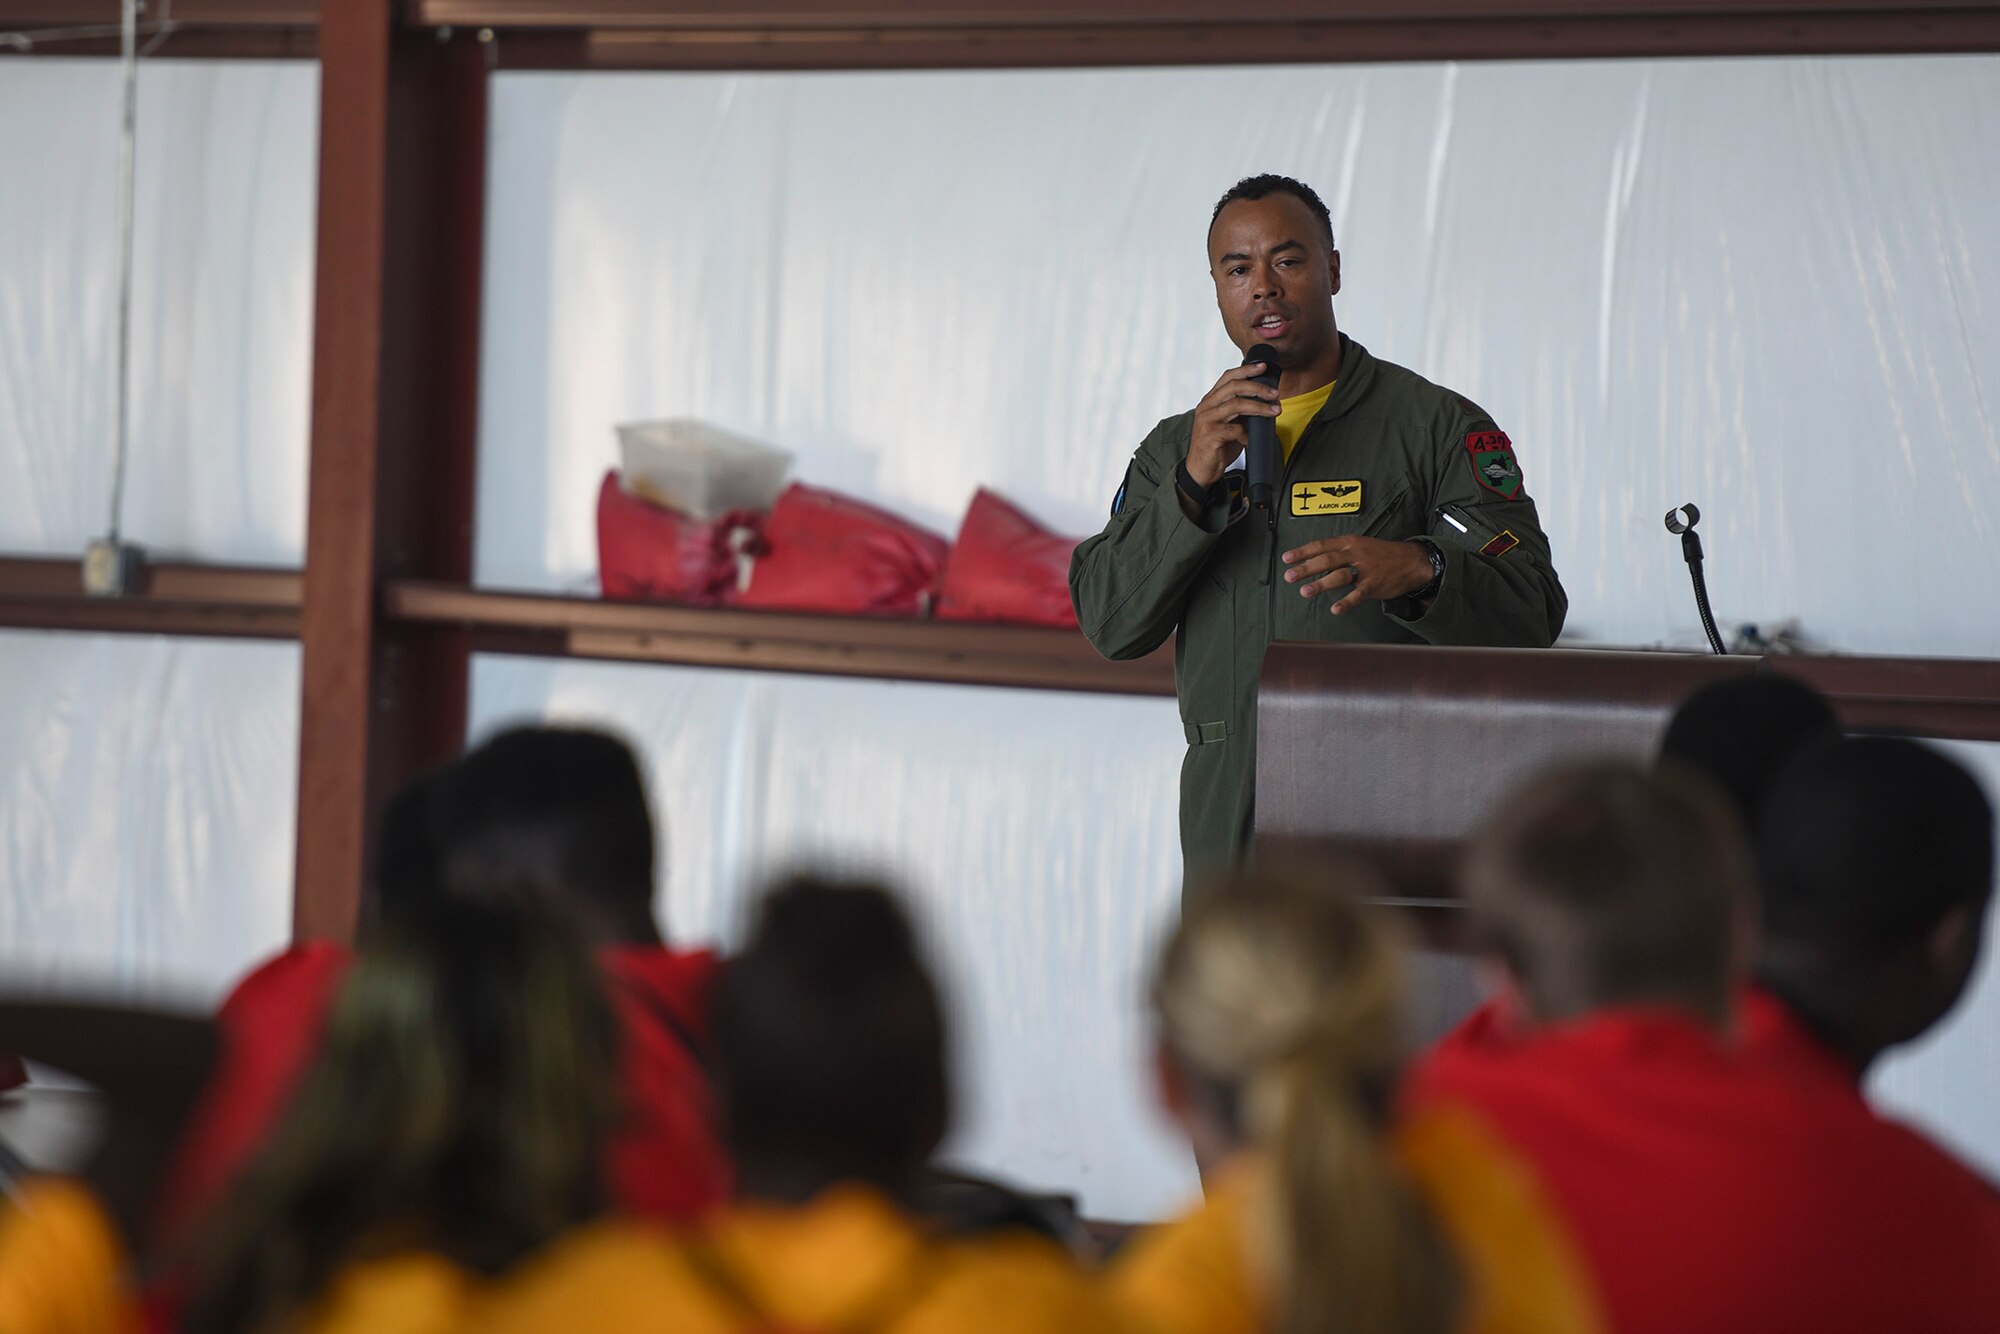 Maj. Aaron Jones, 81st Fighter Squadron AAF flight commander and Legacy Flight Academy event coordinator team member, encourages youth to explore military aviation careers during the Eyes Above the Horizon diversity outreach program, July 22, 2017, in Valdosta, Ga. The Valdosta Regional Airport welcomed approximately 100 10-19-year-olds as they took the Valdosta skies to commemorate the 76th Anniversary of the historic Tuskegee Airmen. The program focuses on mentoring and familiarizing underrepresented minorities with basic flying fundamentals. (U.S. Air Force photo by Senior Airman Greg Nash) 